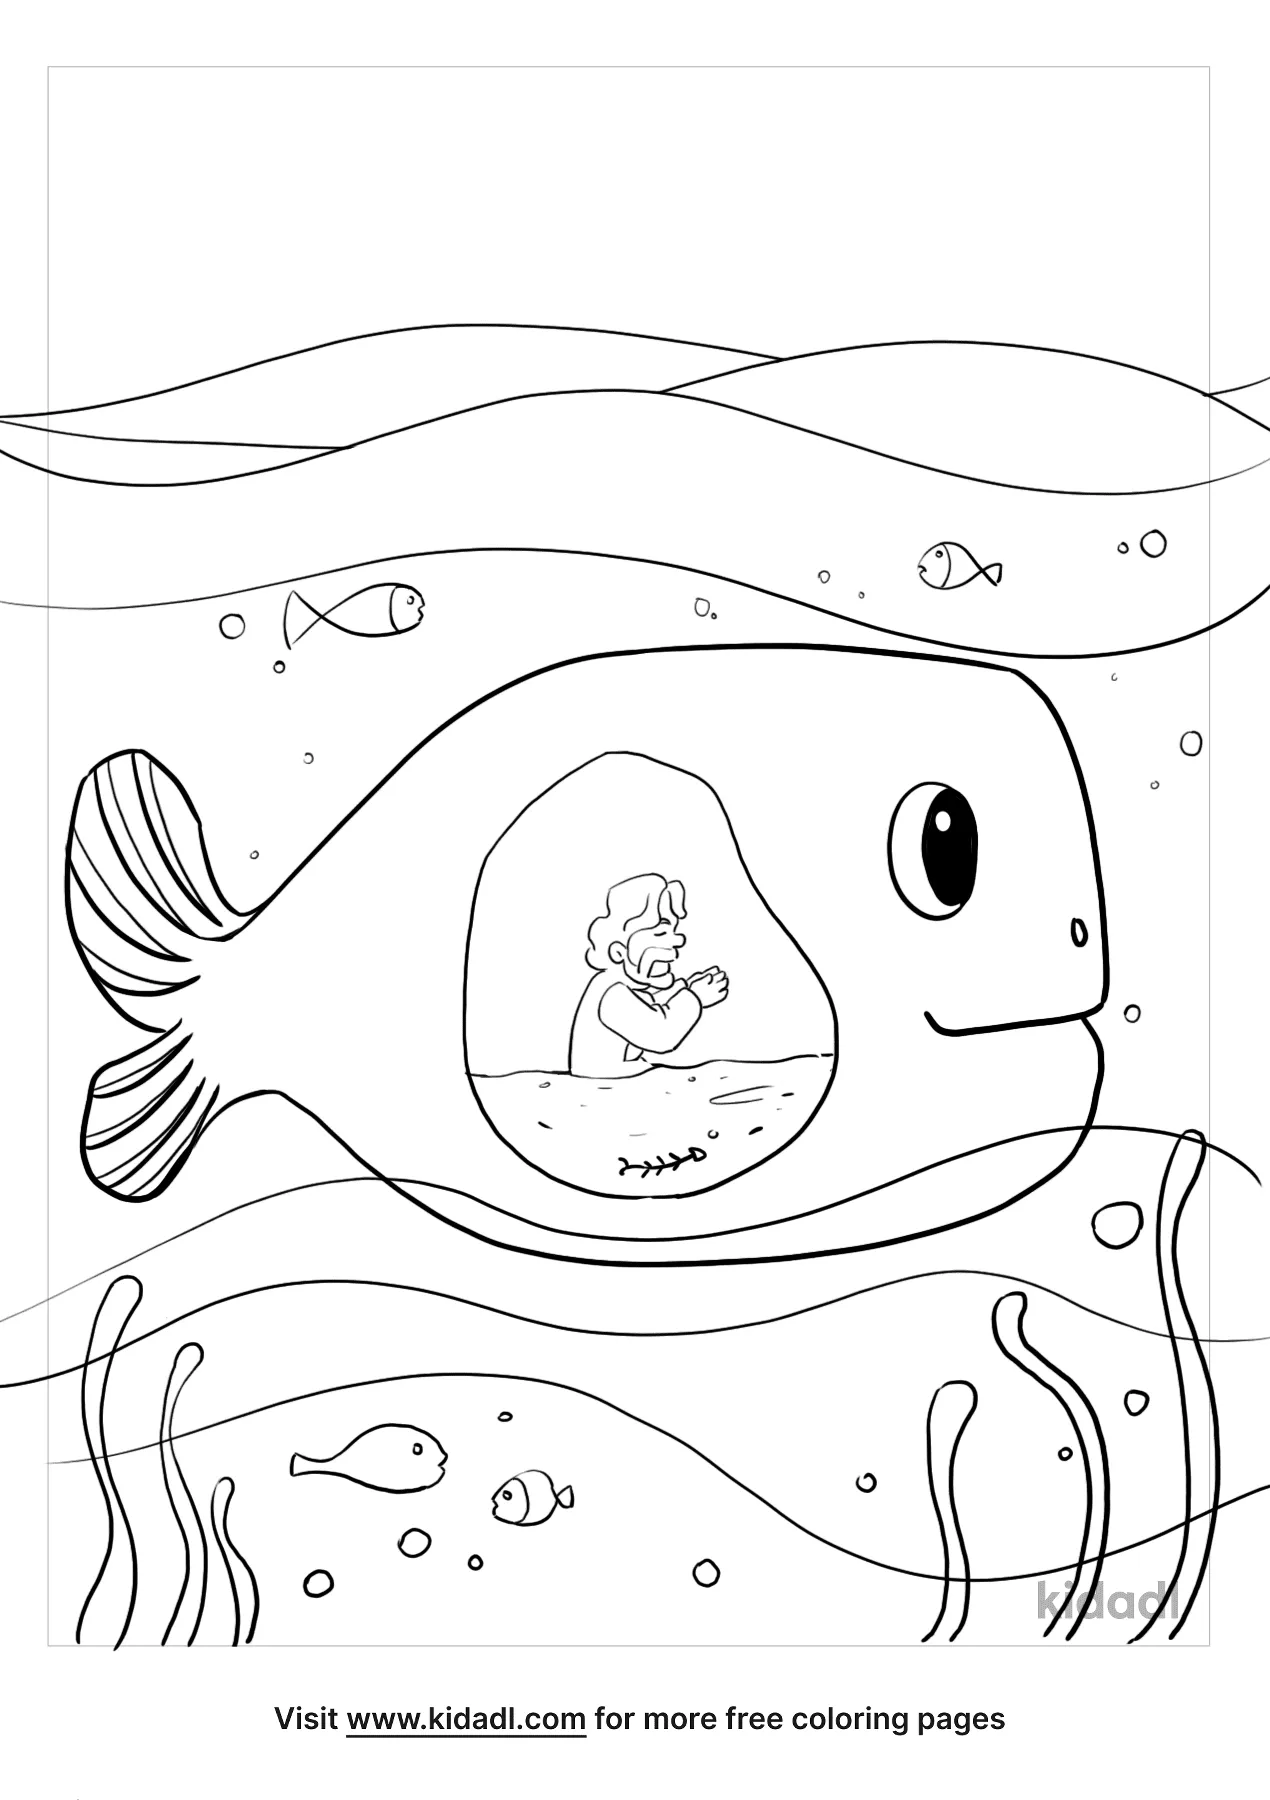 Jonah And The Whale Coloring Pages   Free Bible Coloring Pages ...